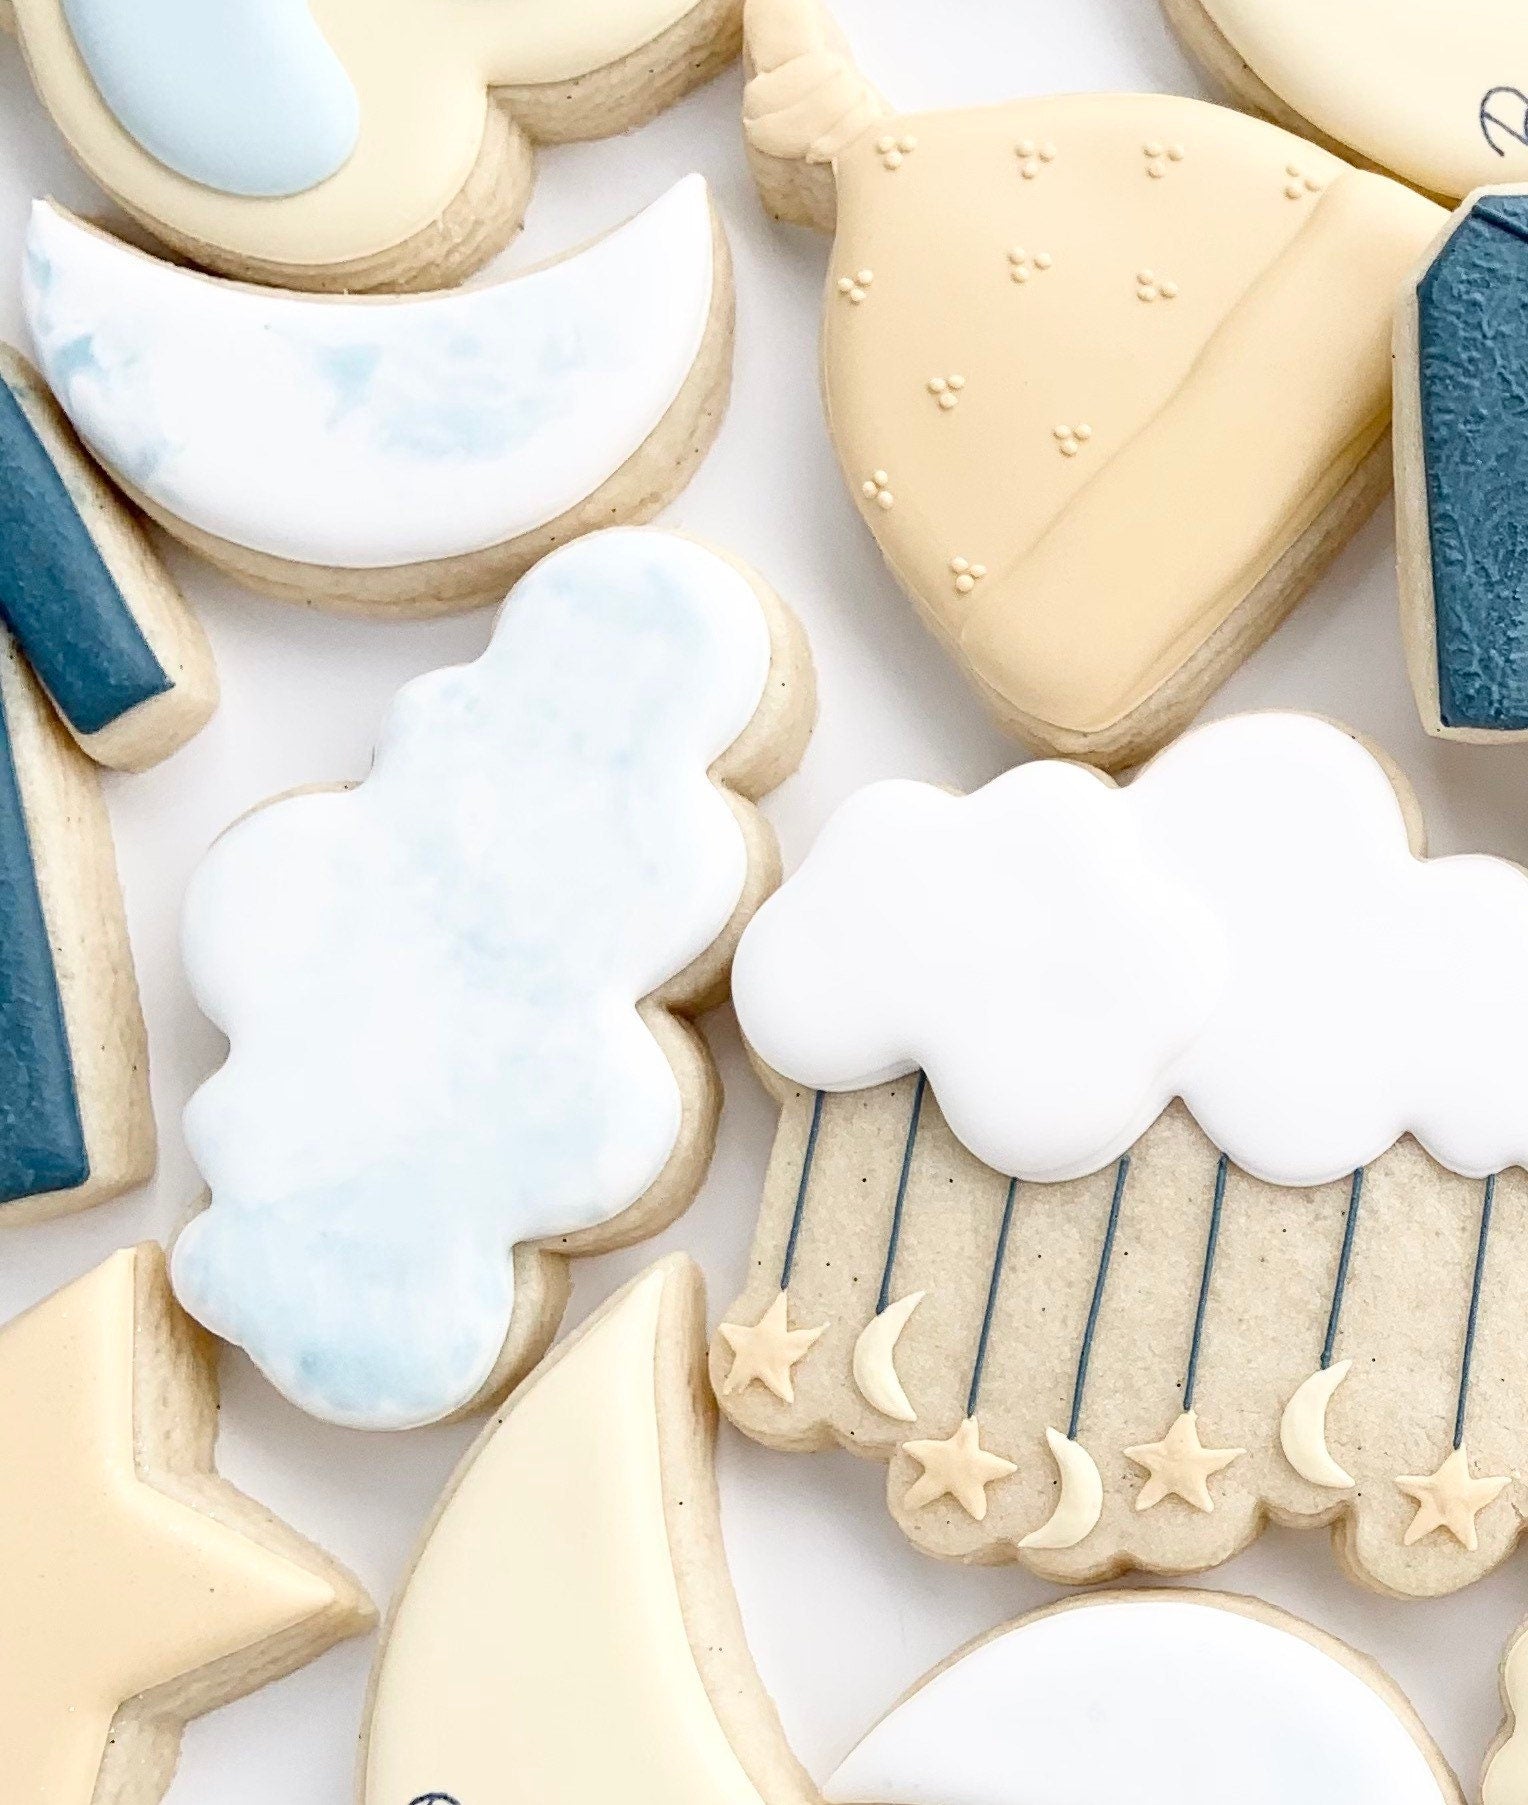 Cloud and Stars Cookie Cutter/Dishwasher Safe